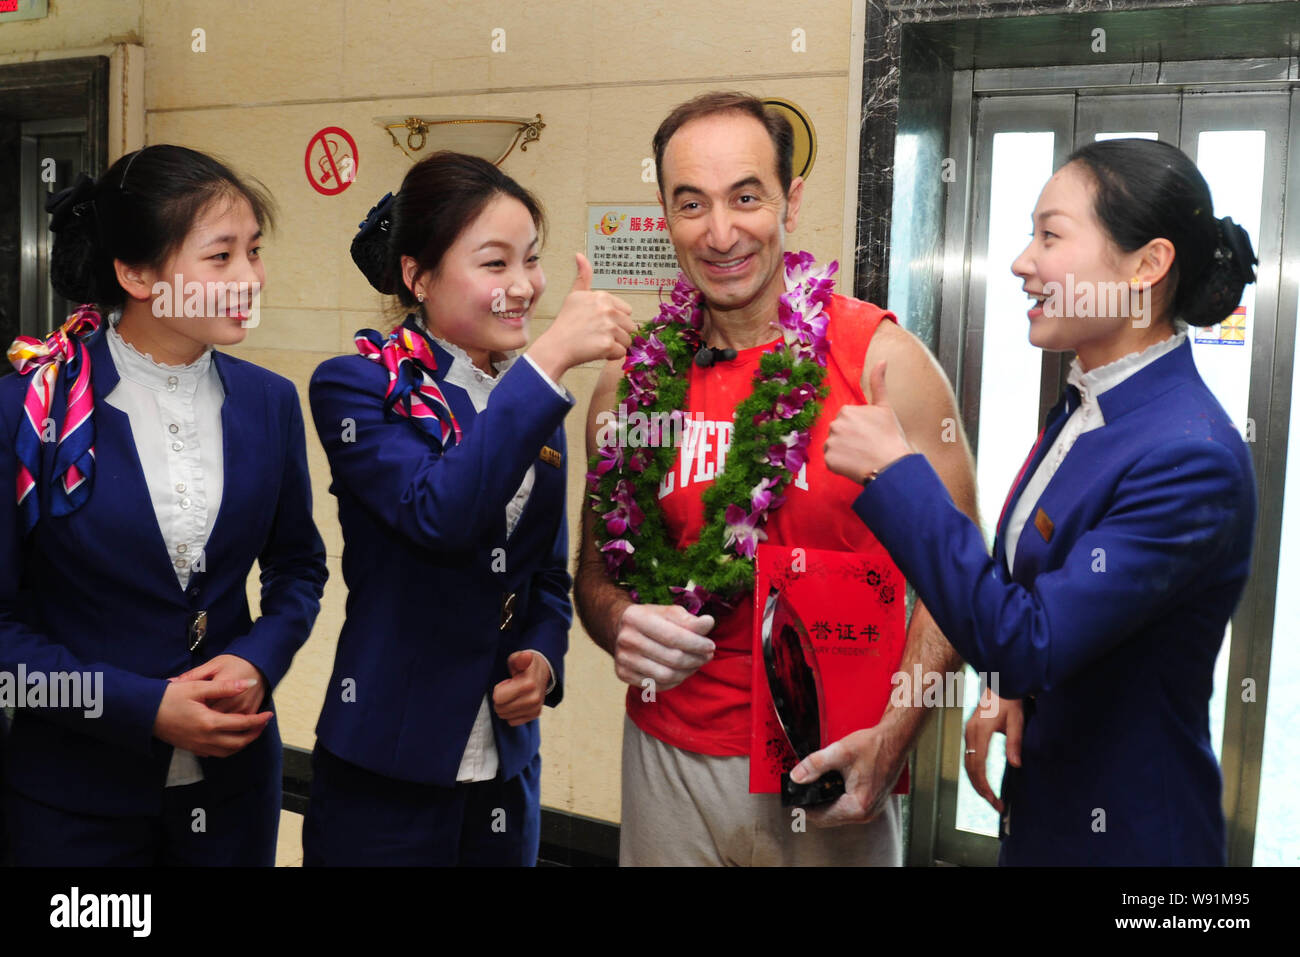 French climber Jean-Michel Casanova, second right, poses with Chinese  hostesses after climbing up the Bailong Elevator, also known as the Hundred  Drag Stock Photo - Alamy